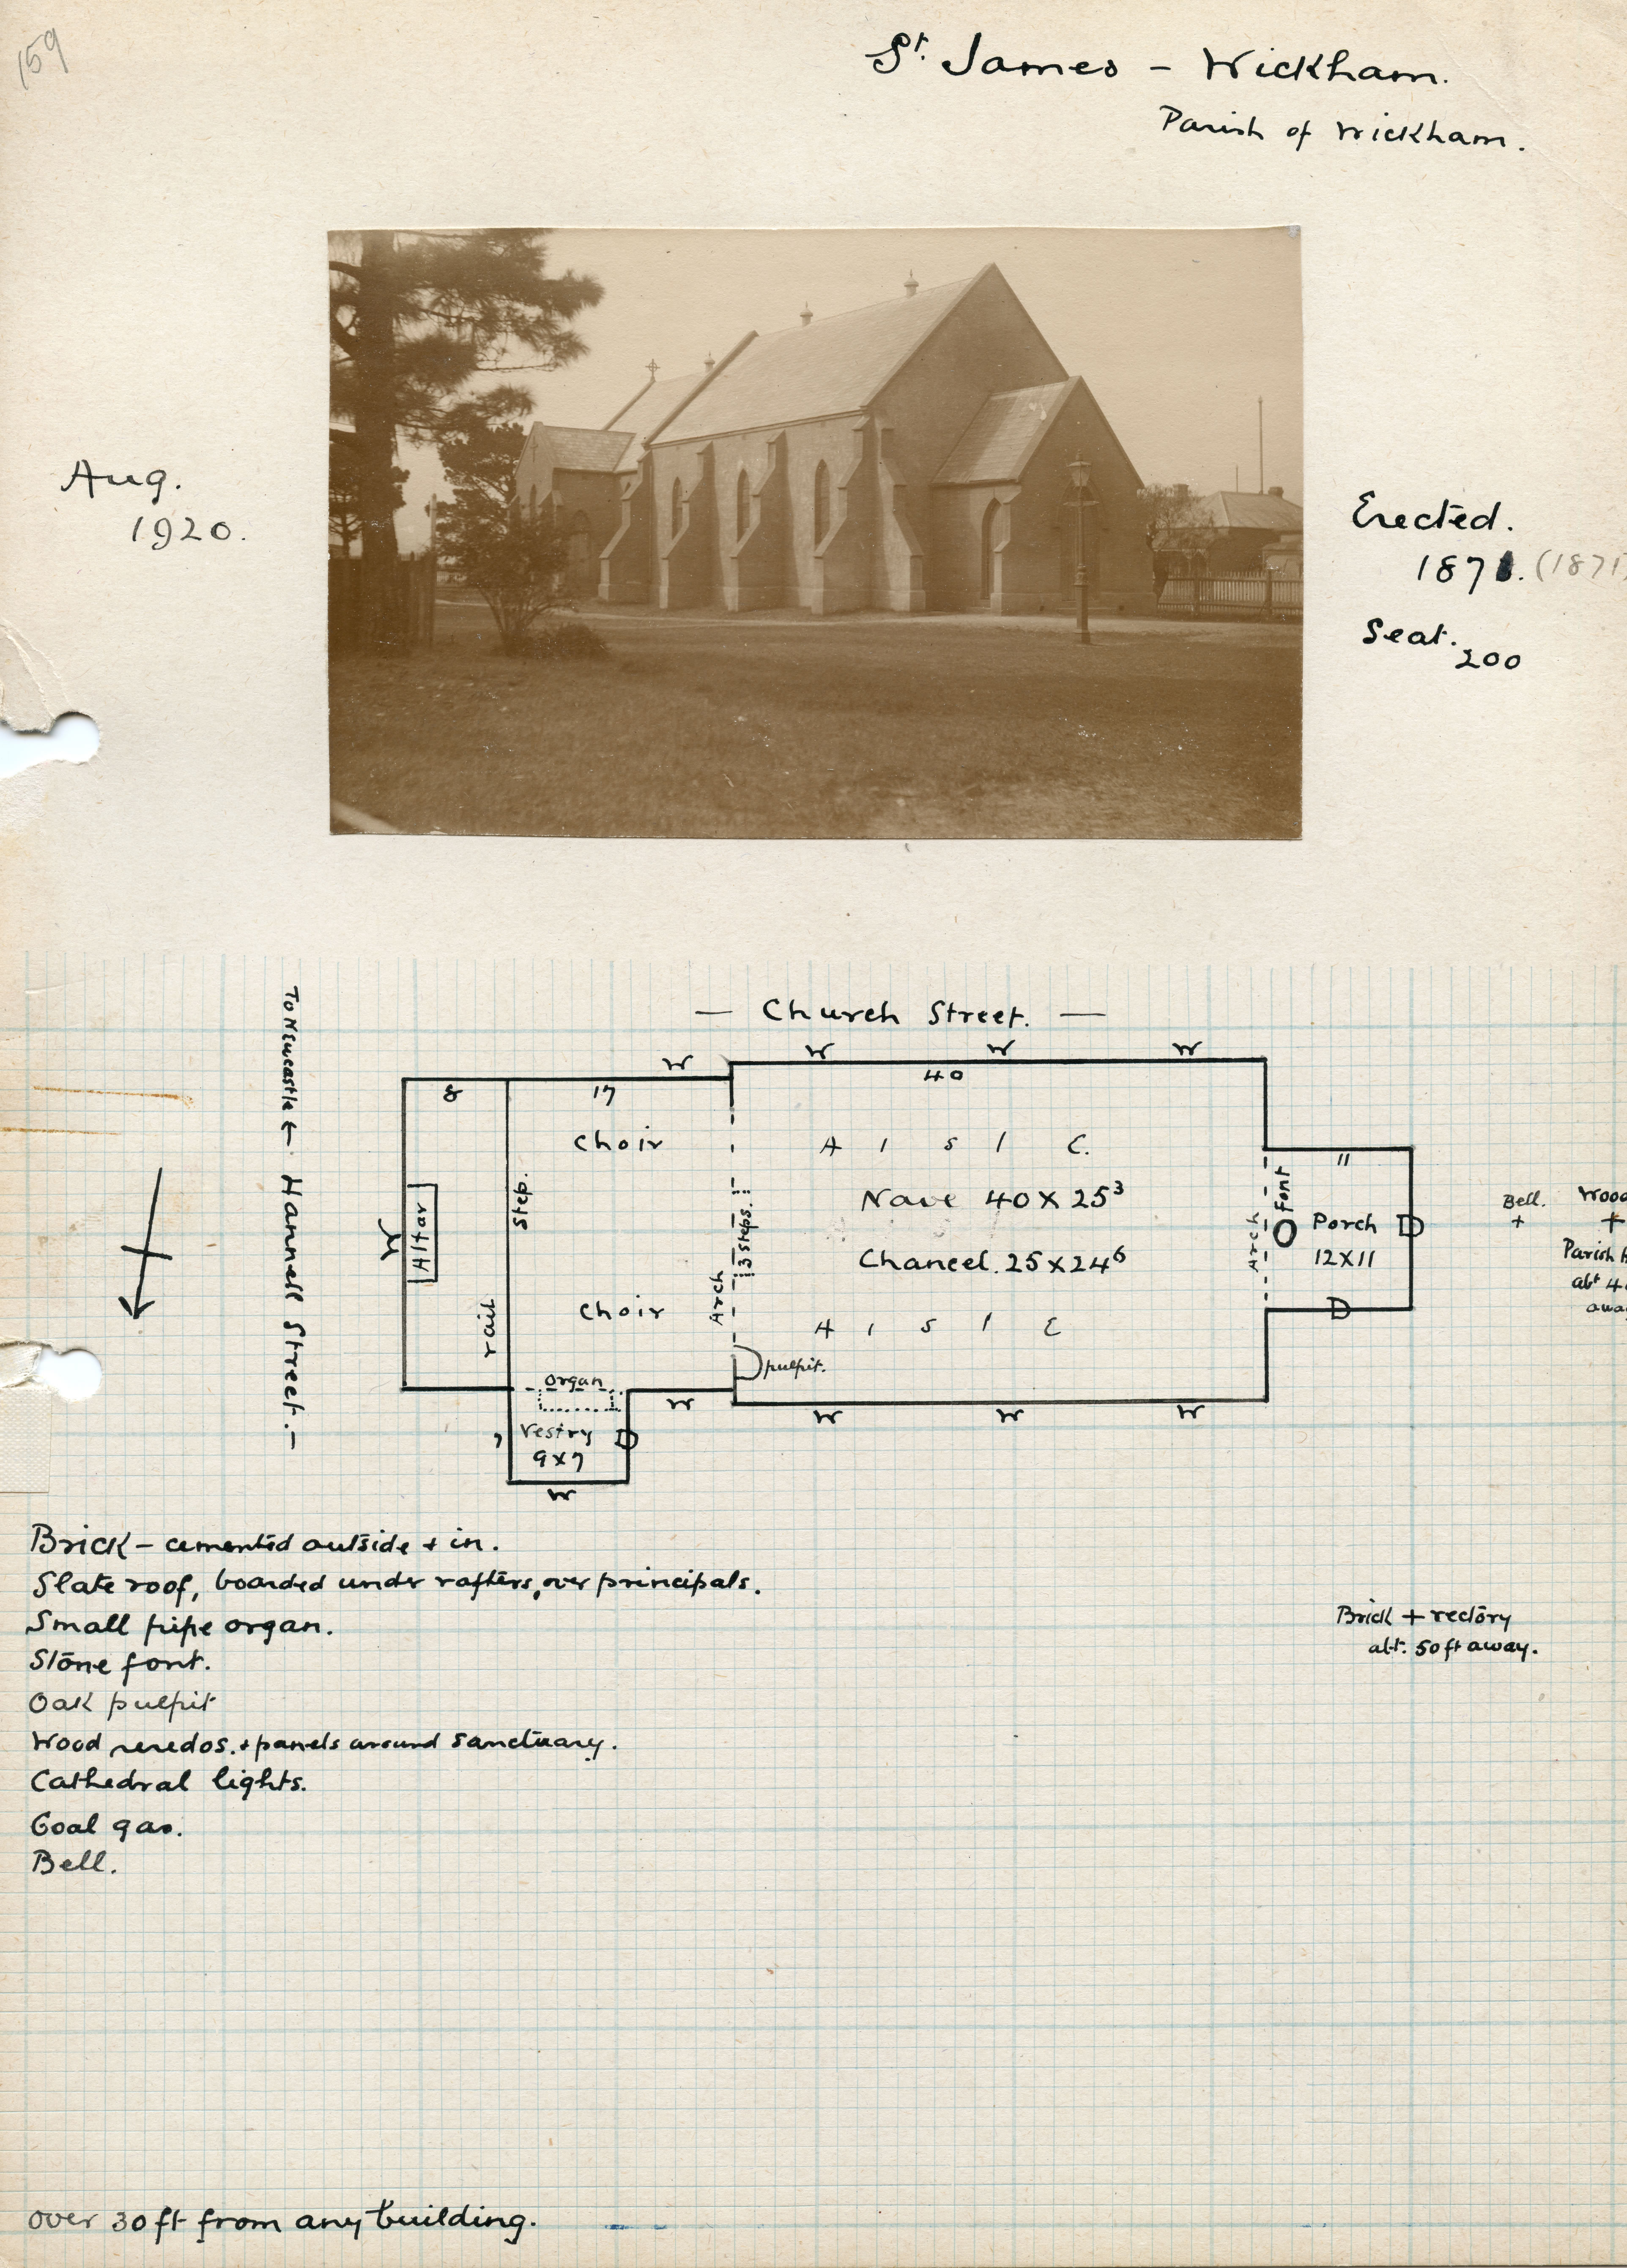 Photograph and Floor Plan of the former St James' Church Wickham (Courtesy of Anglican Diocese Archivesm Cultural Collections (UoNCC)